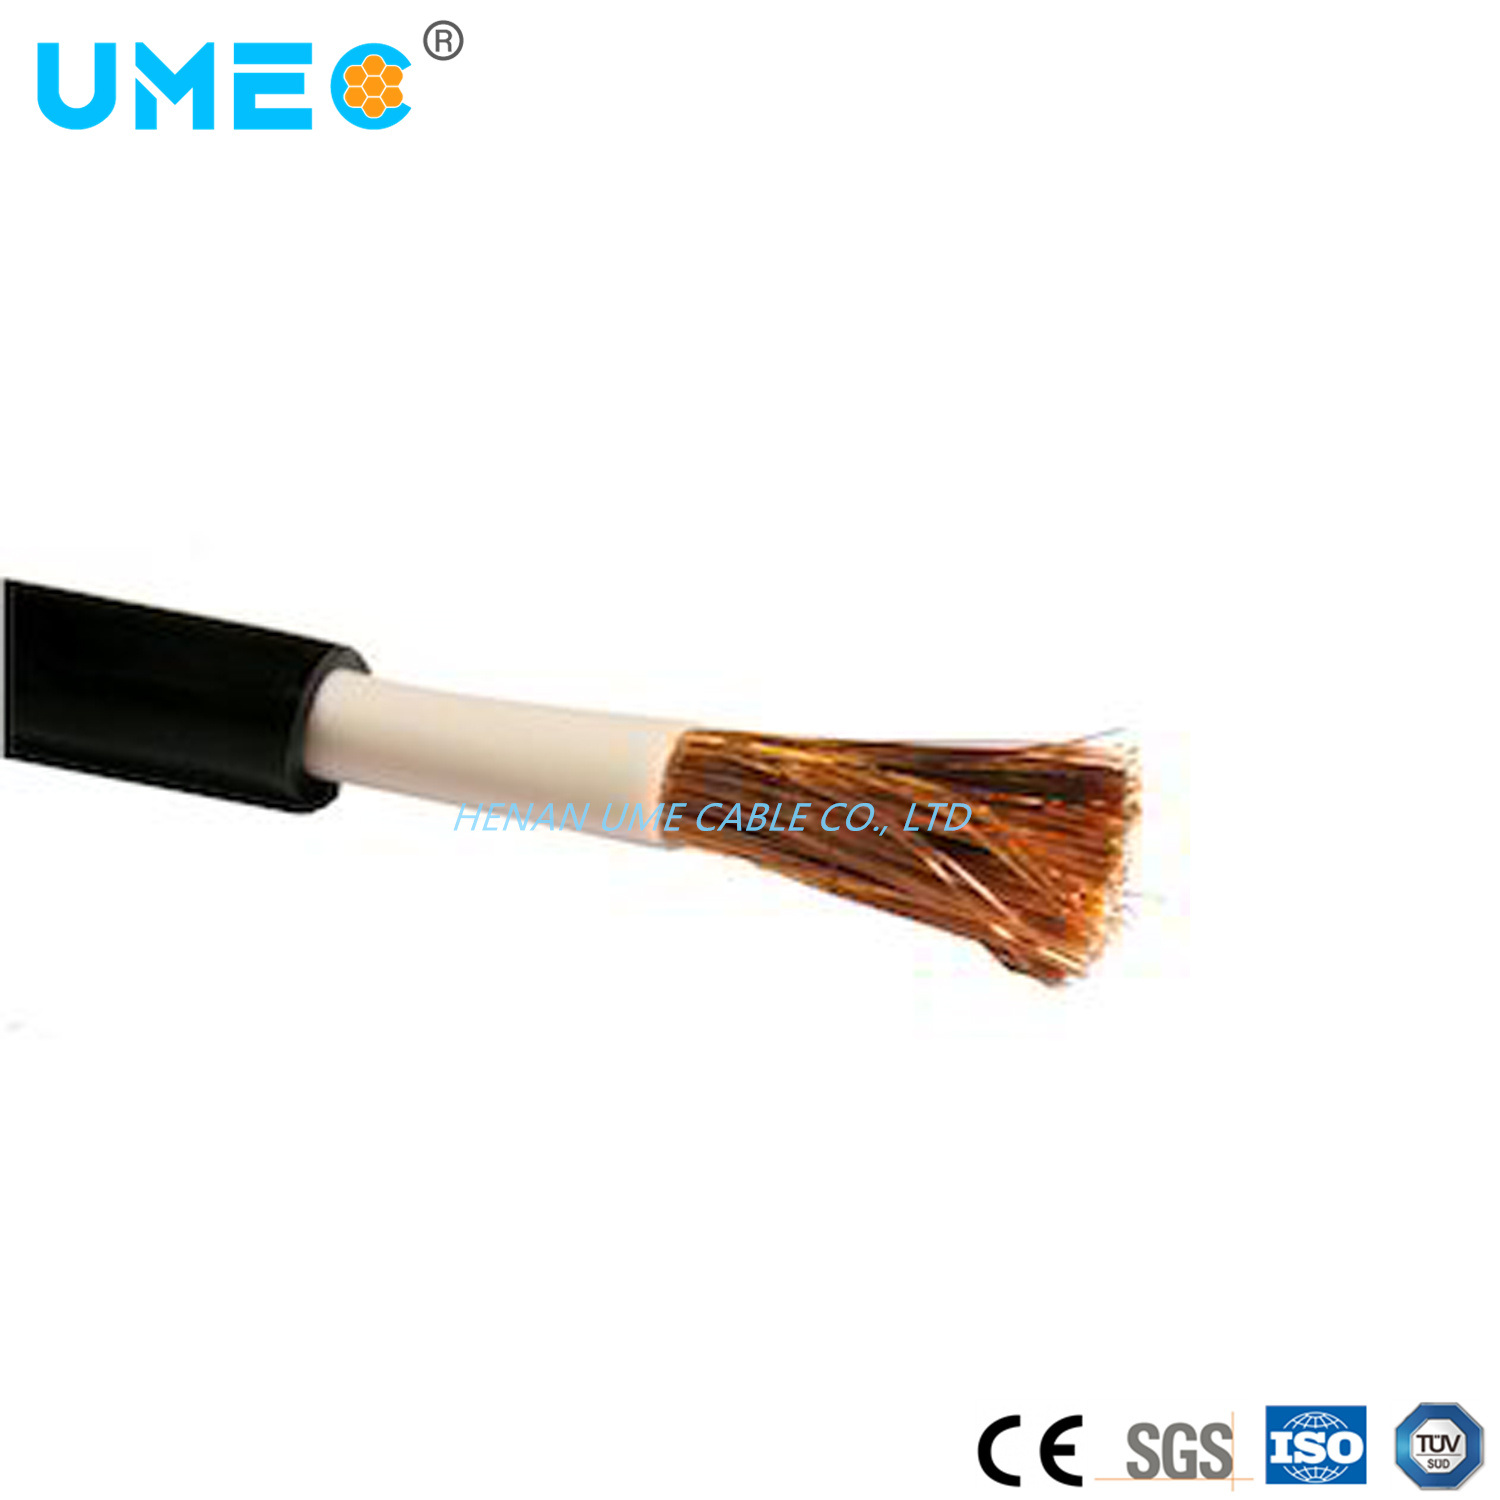 Flexible Insulation Rubber Power Cable Low Voltage Rubber Welding Cable Yh Yhf